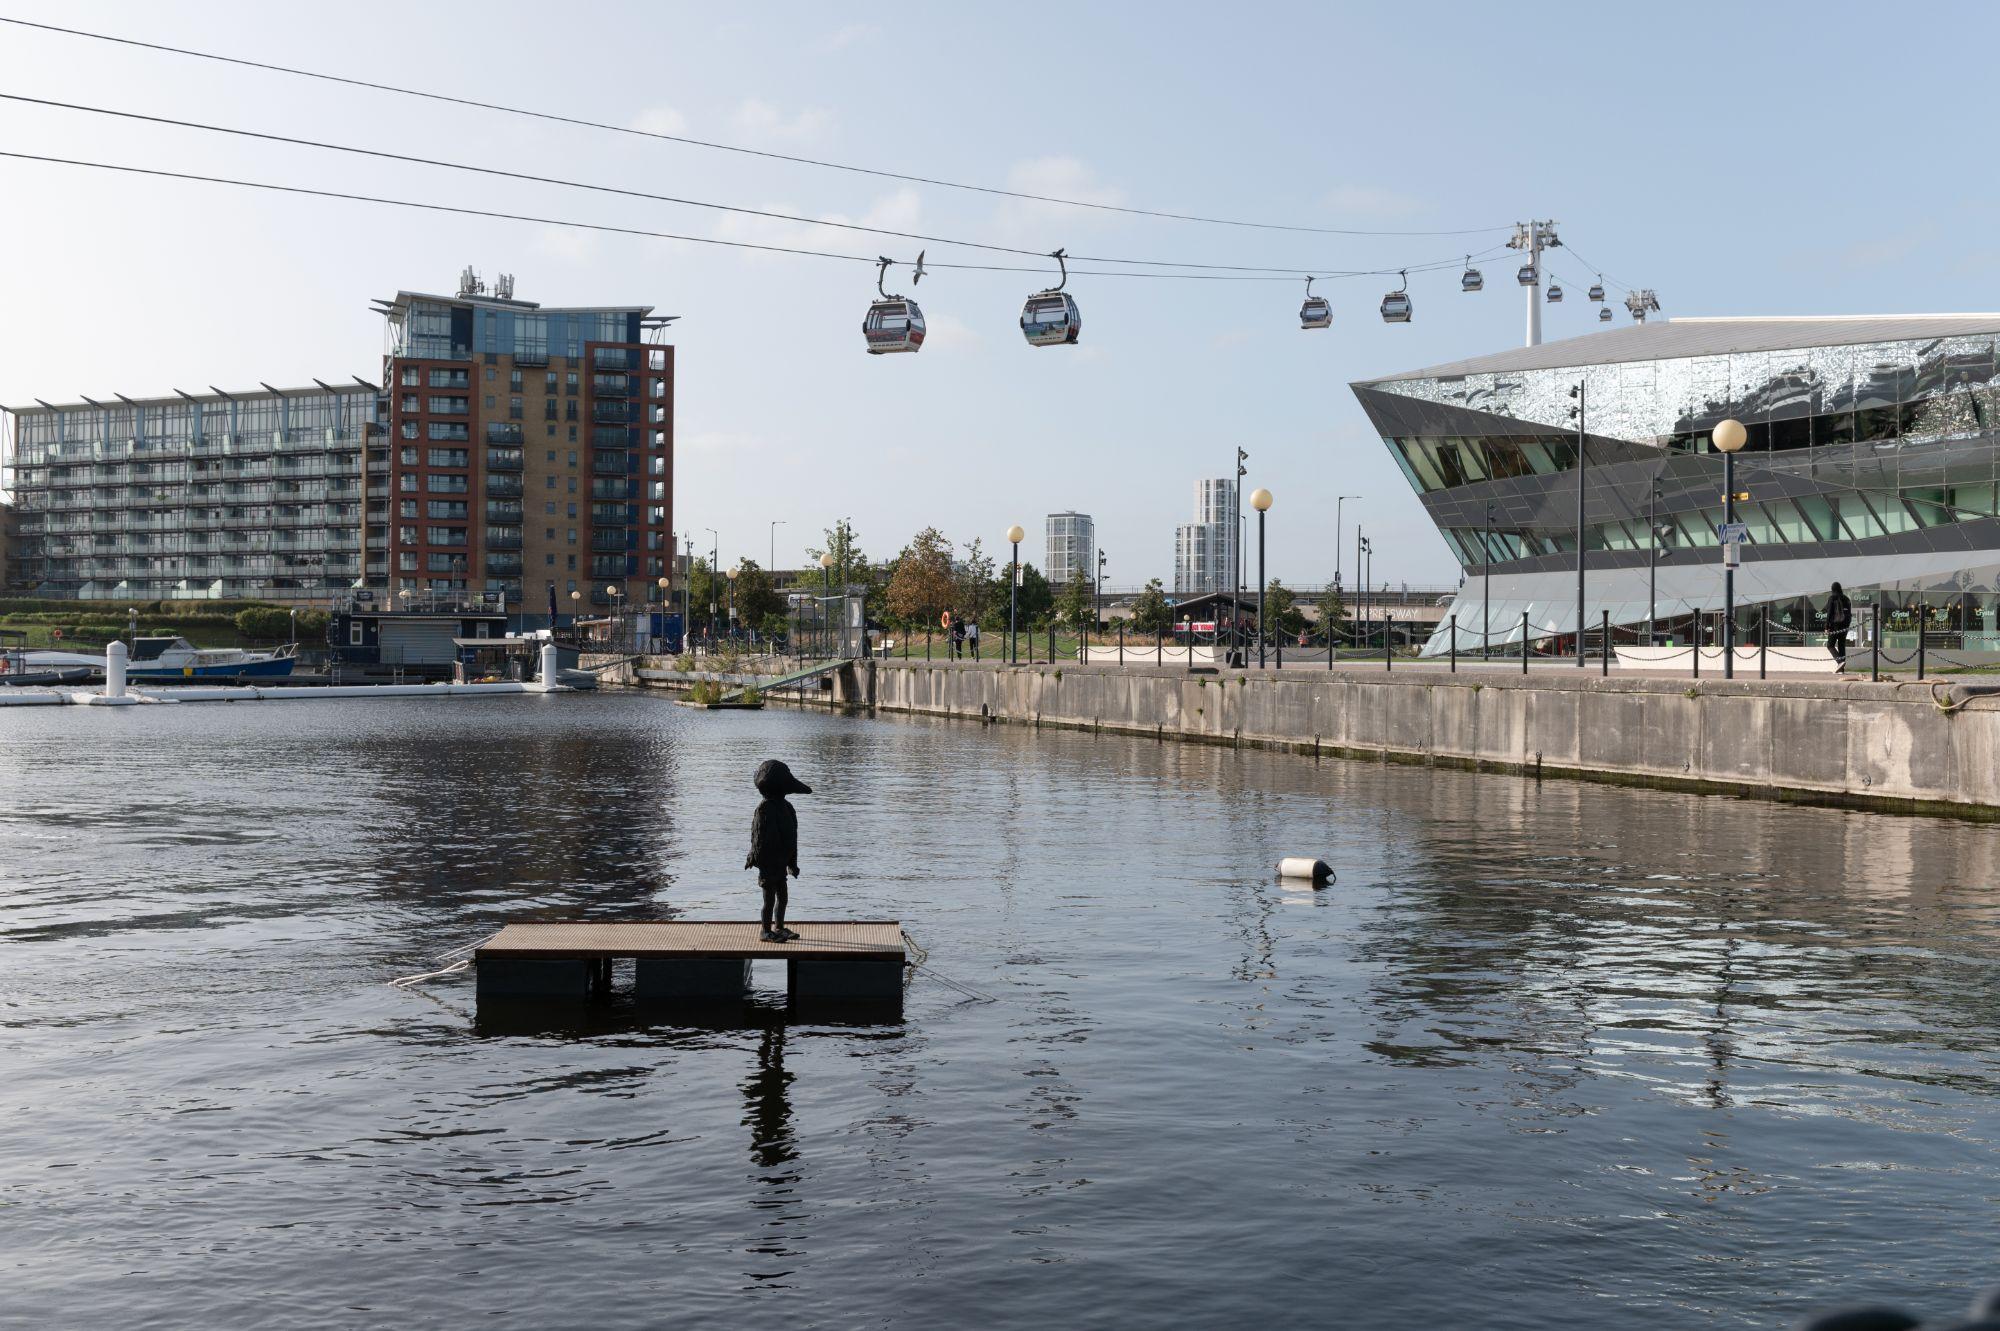 The cable cars over the dock water with the Bird Boy sculpture